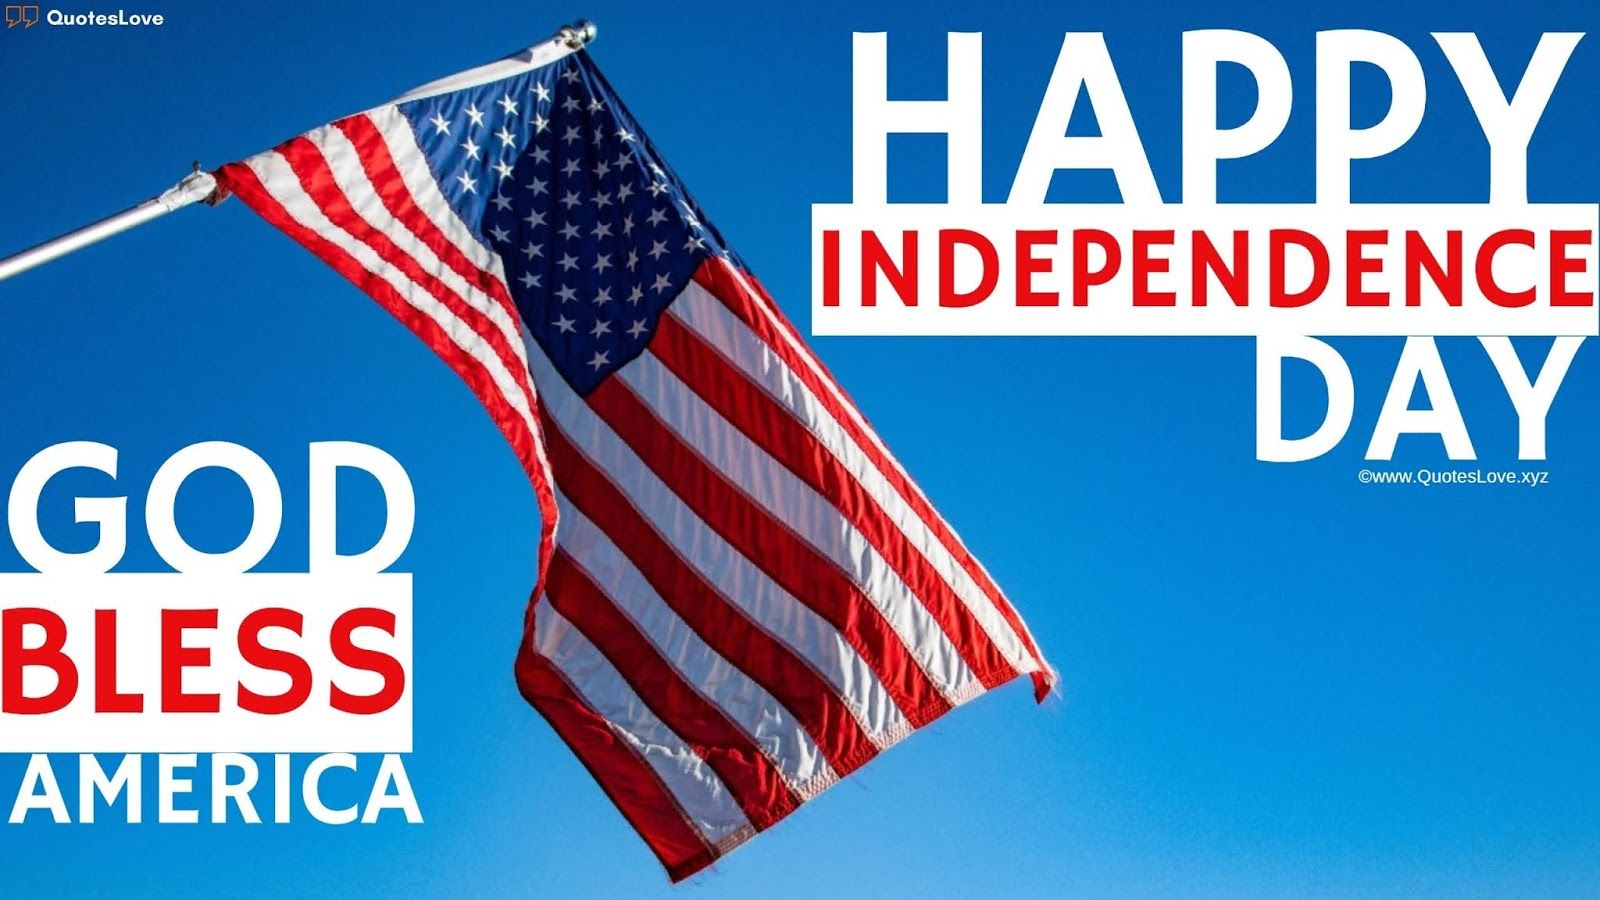 Best] 45 [USA] Independence Day 2021: Quotes, Wishes, Messages, Greetings, Sayings, Image, Picture, Poster, Wallpaper